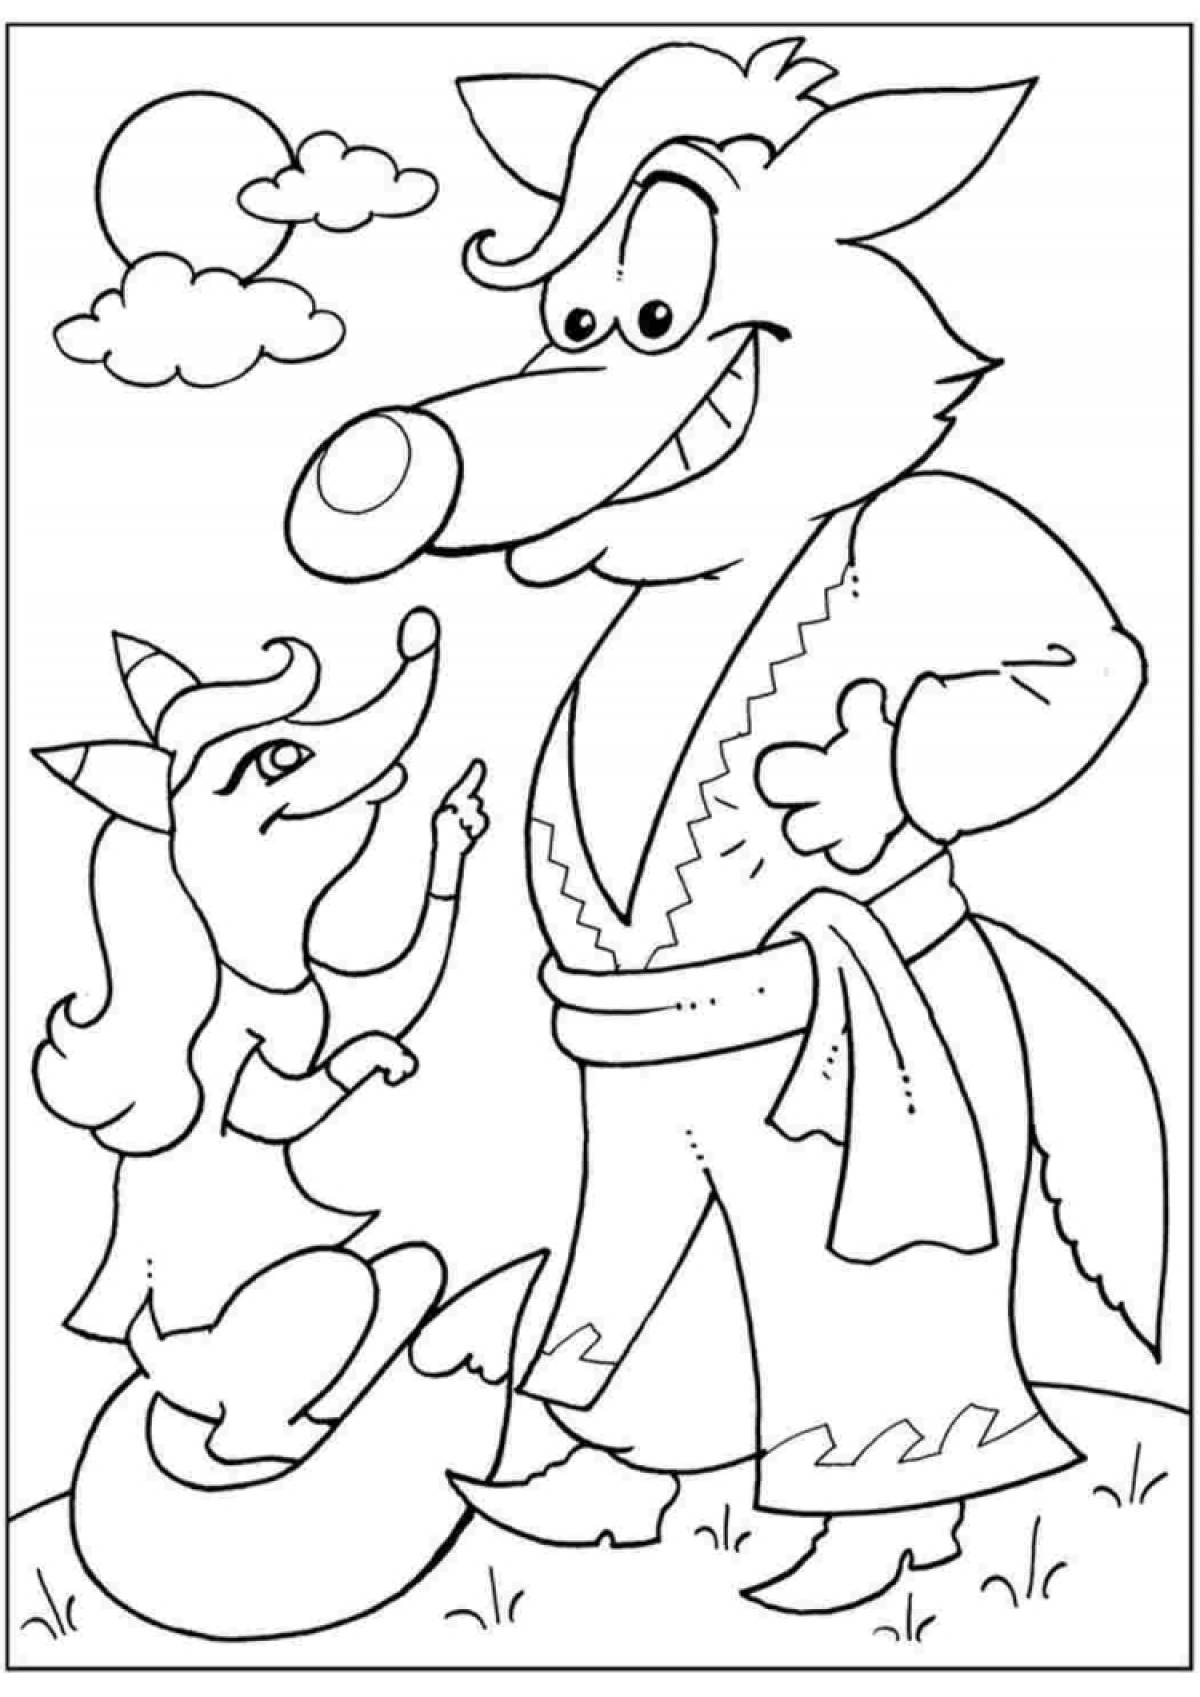 Coloring fox and wolf for kids